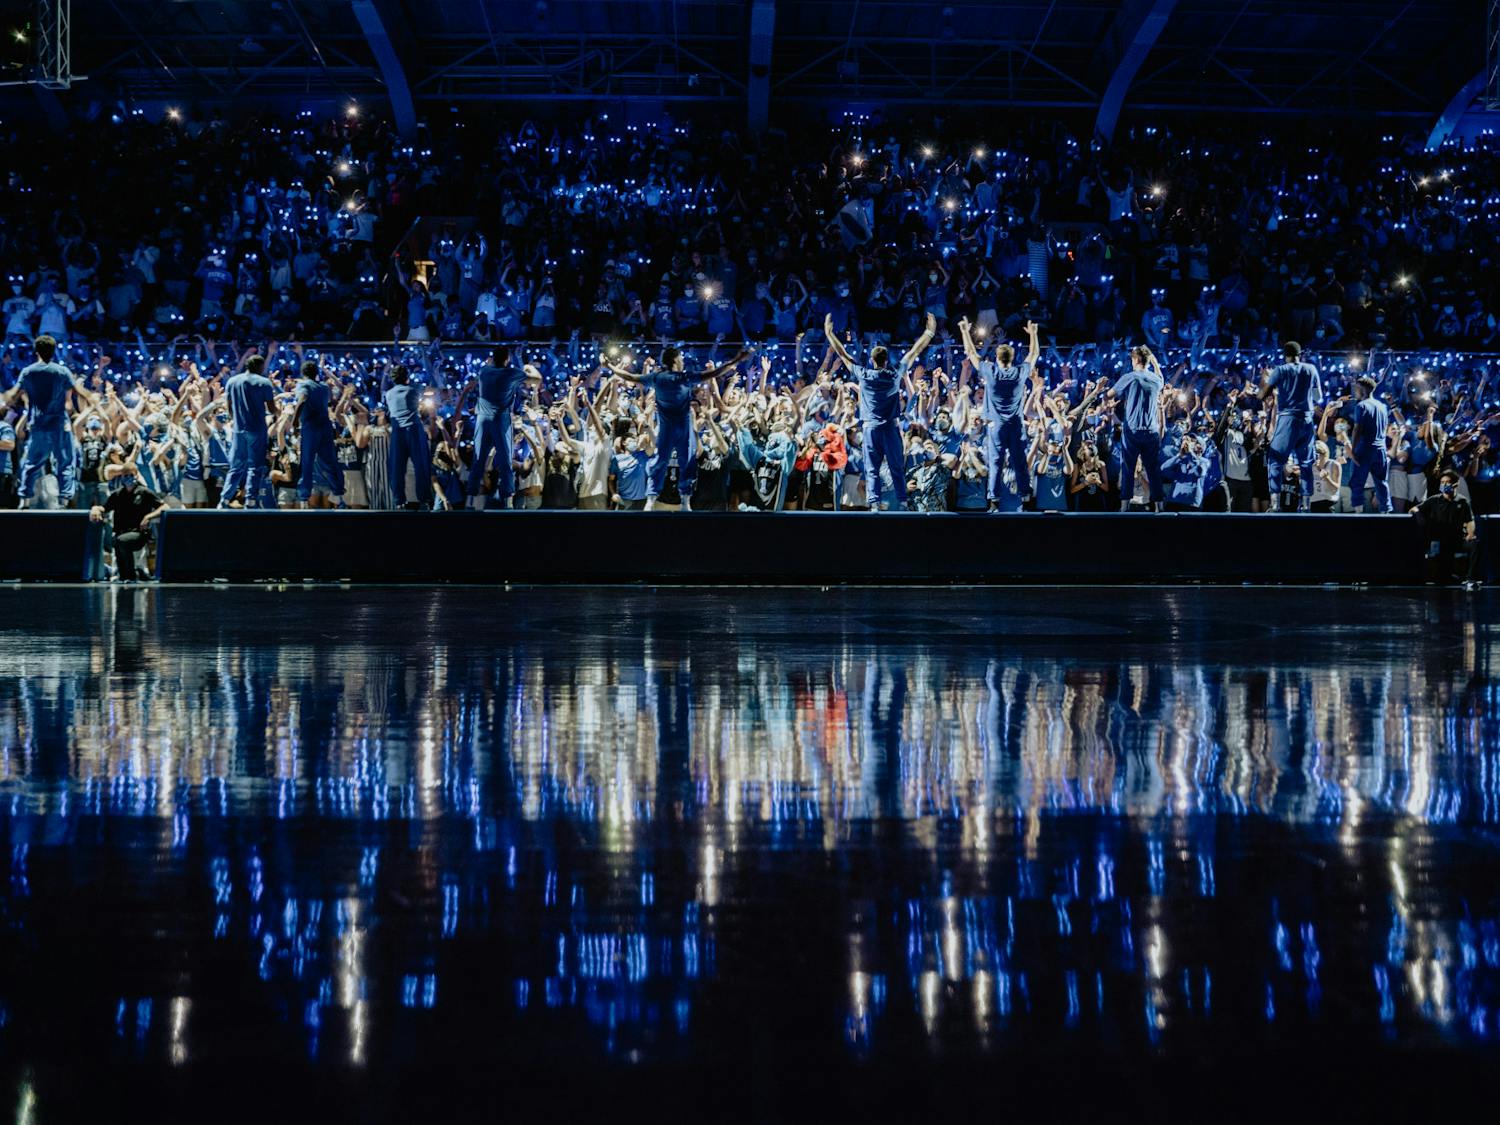 Duke will host its annual Countdown to Craziness event Friday to officially kick off basketball season.